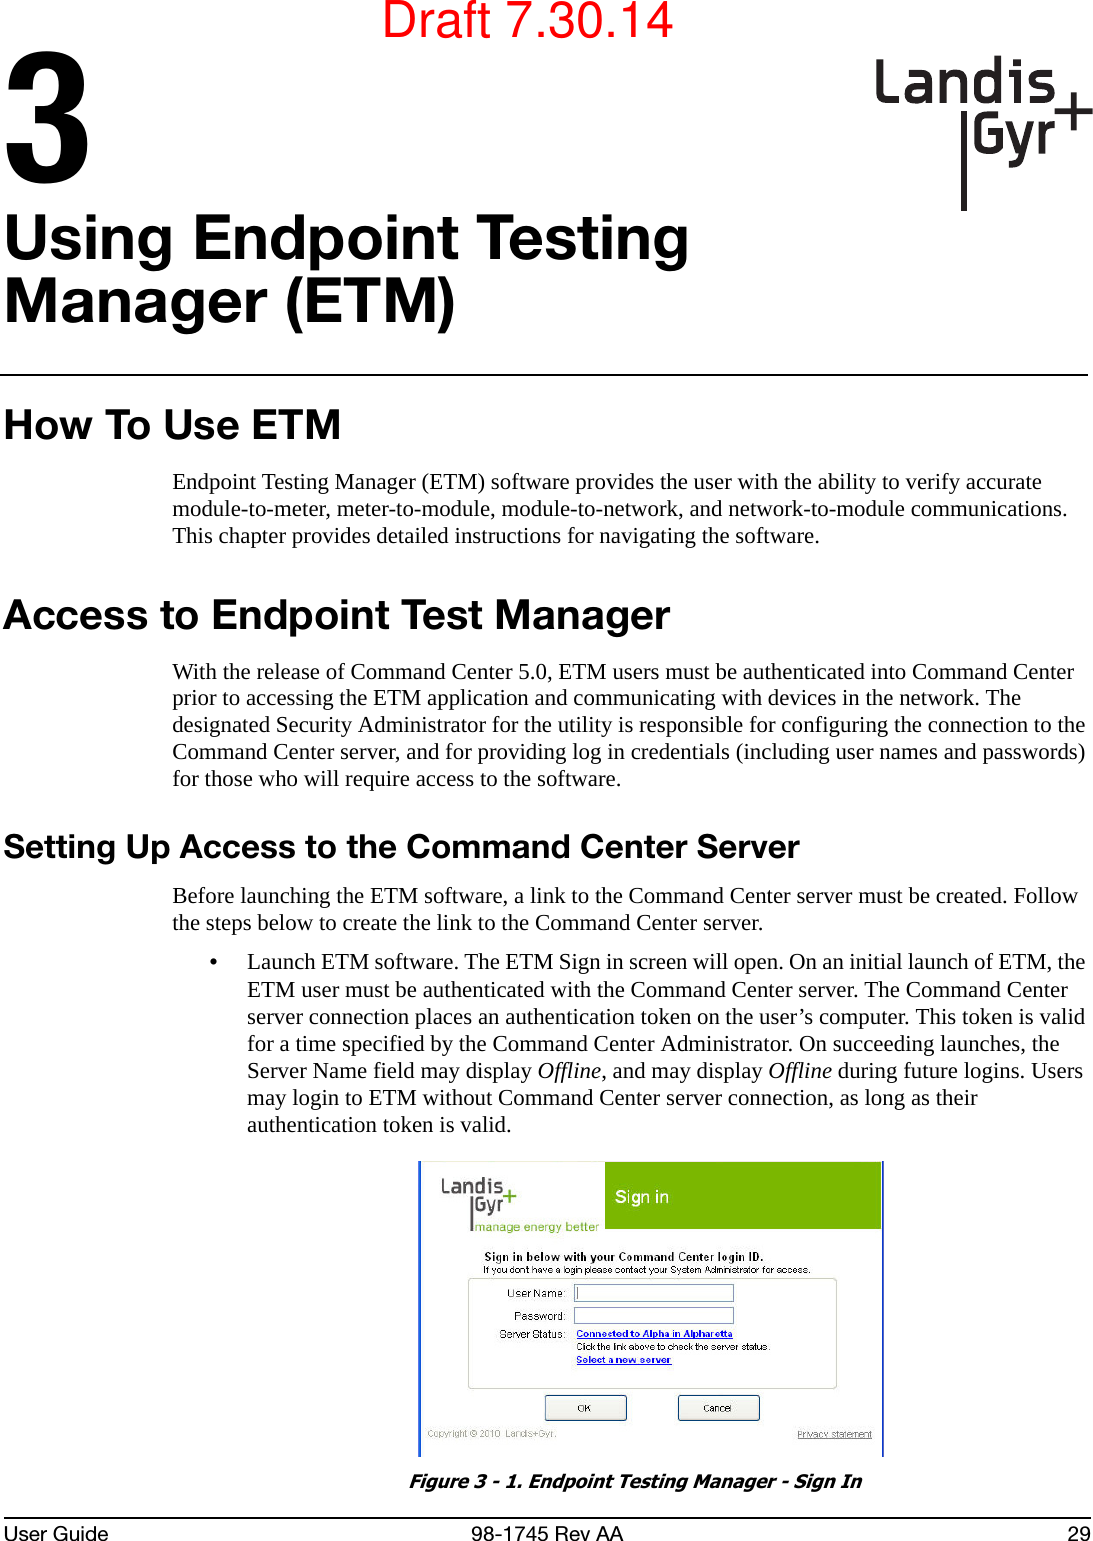 User Guide 98-1745 Rev AA 293Using Endpoint Testing Manager (ETM)How To Use ETMEndpoint Testing Manager (ETM) software provides the user with the ability to verify accurate module-to-meter, meter-to-module, module-to-network, and network-to-module communications. This chapter provides detailed instructions for navigating the software.Access to Endpoint Test ManagerWith the release of Command Center 5.0, ETM users must be authenticated into Command Center prior to accessing the ETM application and communicating with devices in the network. The designated Security Administrator for the utility is responsible for configuring the connection to the Command Center server, and for providing log in credentials (including user names and passwords) for those who will require access to the software.Setting Up Access to the Command Center ServerBefore launching the ETM software, a link to the Command Center server must be created. Follow the steps below to create the link to the Command Center server.•Launch ETM software. The ETM Sign in screen will open. On an initial launch of ETM, the ETM user must be authenticated with the Command Center server. The Command Center server connection places an authentication token on the user’s computer. This token is valid for a time specified by the Command Center Administrator. On succeeding launches, the Server Name field may display Offline, and may display Offline during future logins. Users may login to ETM without Command Center server connection, as long as their authentication token is valid. Figure 3 - 1. Endpoint Testing Manager - Sign InDraft 7.30.14